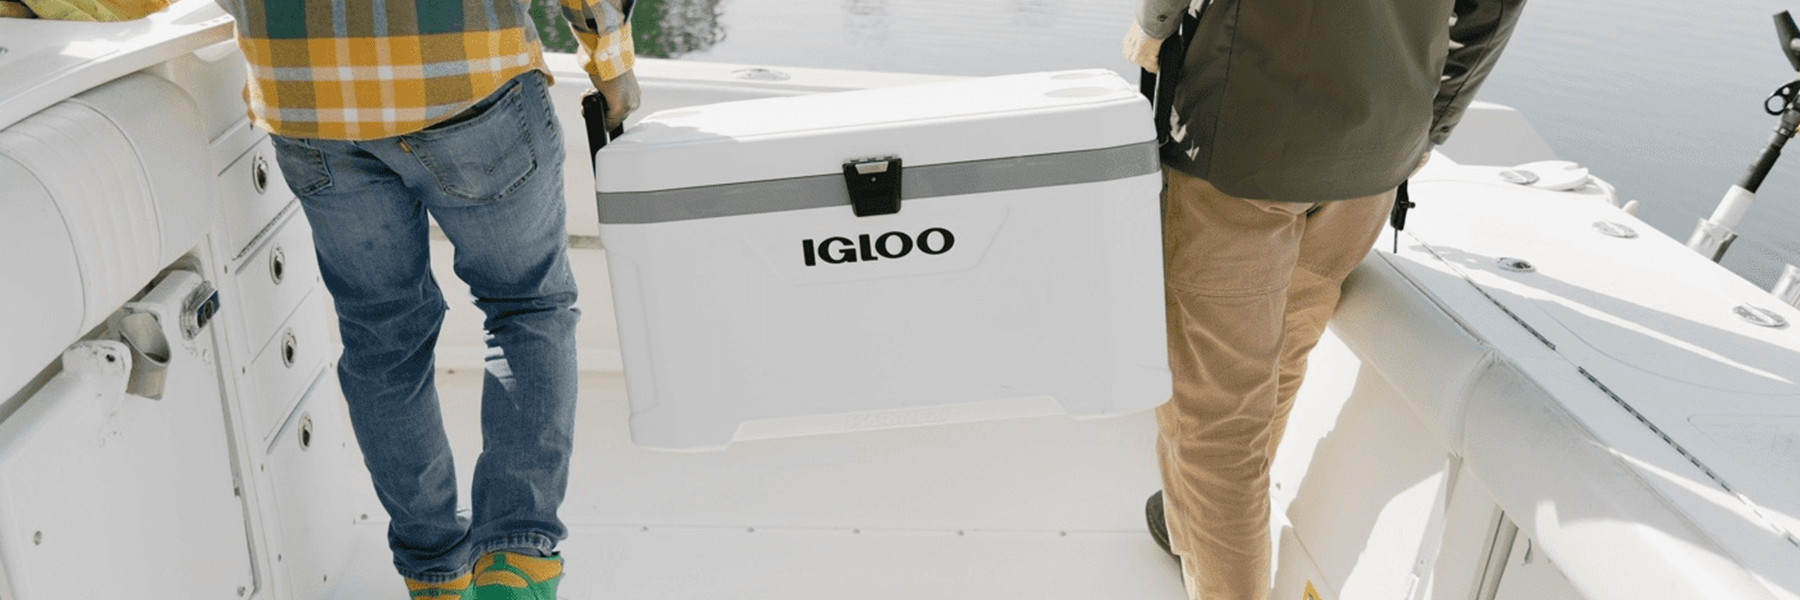 Igloo Cooler Boxes